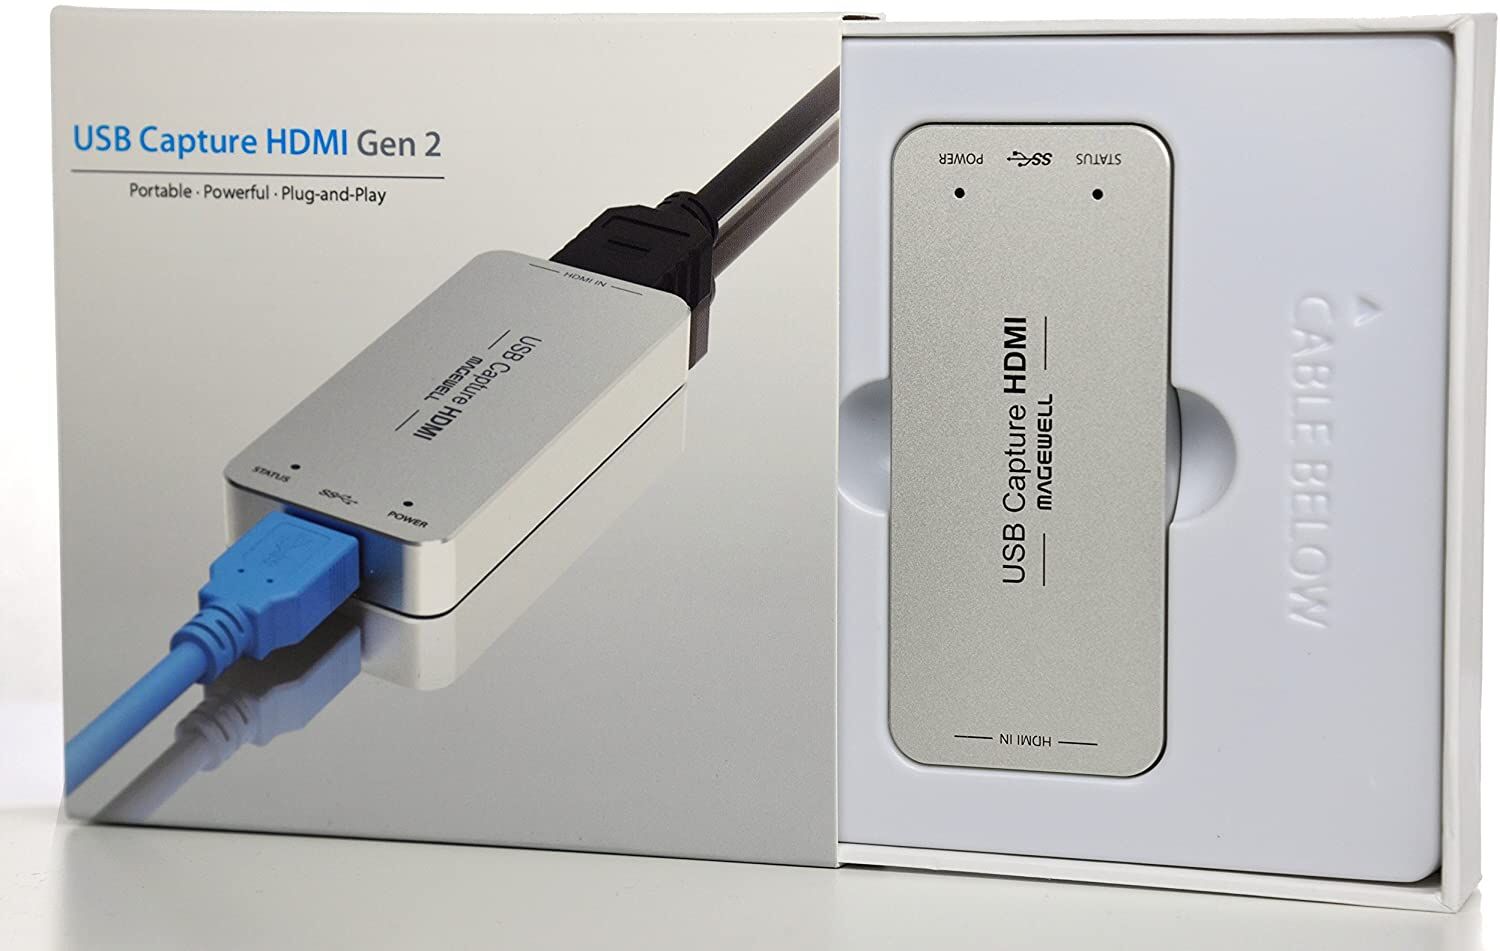 Magewell USB 3.0 HDMI Video Capture Dongle